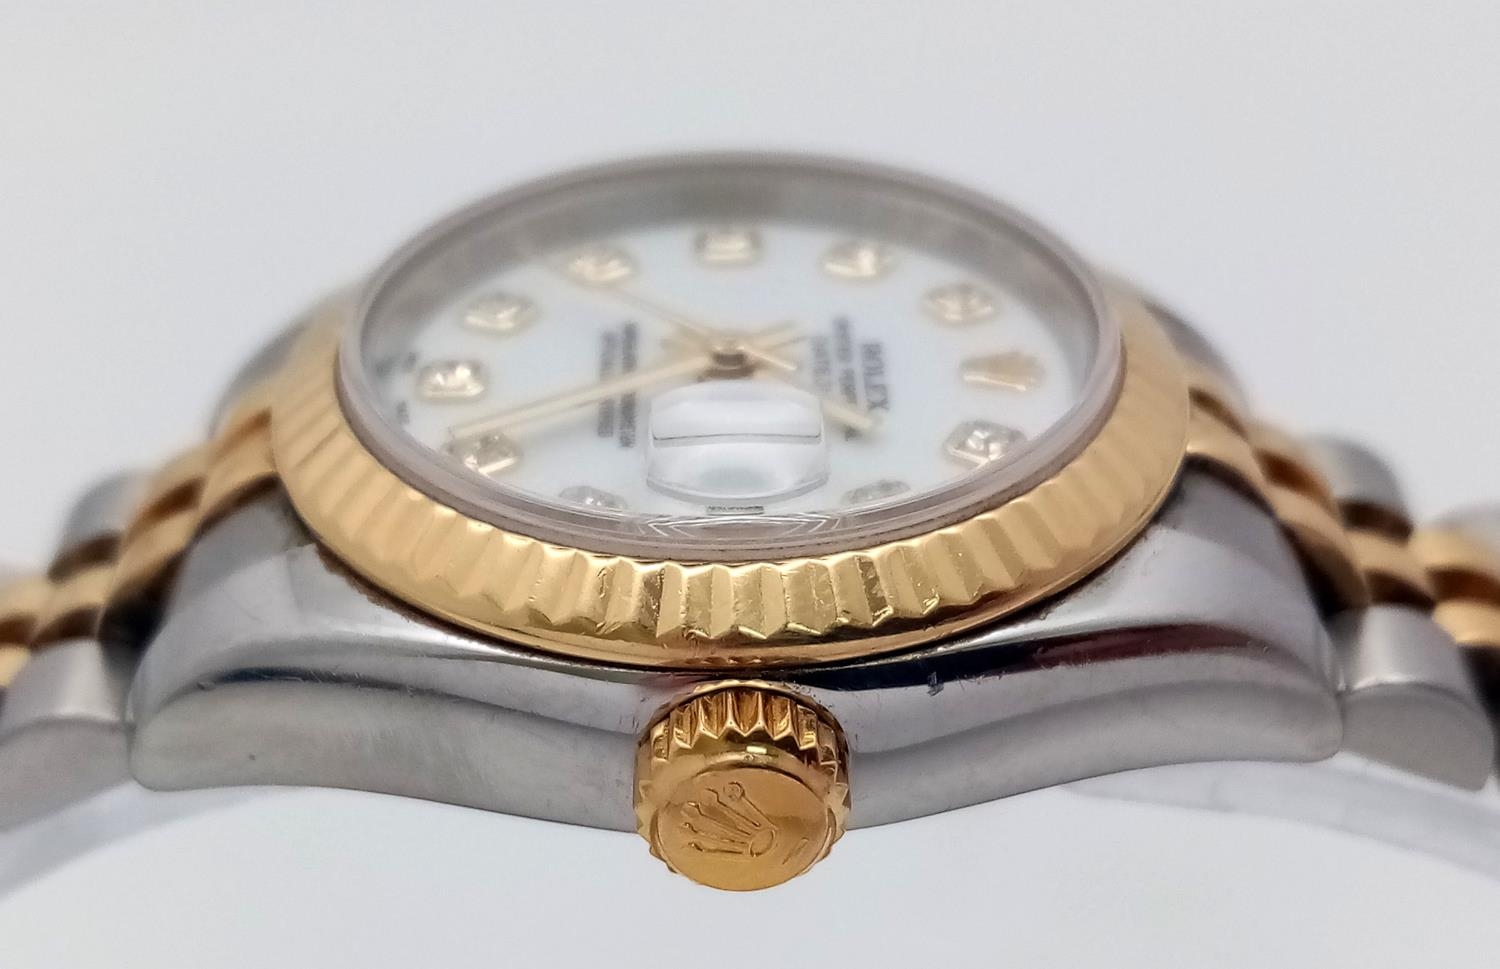 A Rolex Oyster Perpetual Datejust, Diamond Bi-Metal Ladies Watch. 18k gold and stainless steel - Image 6 of 9